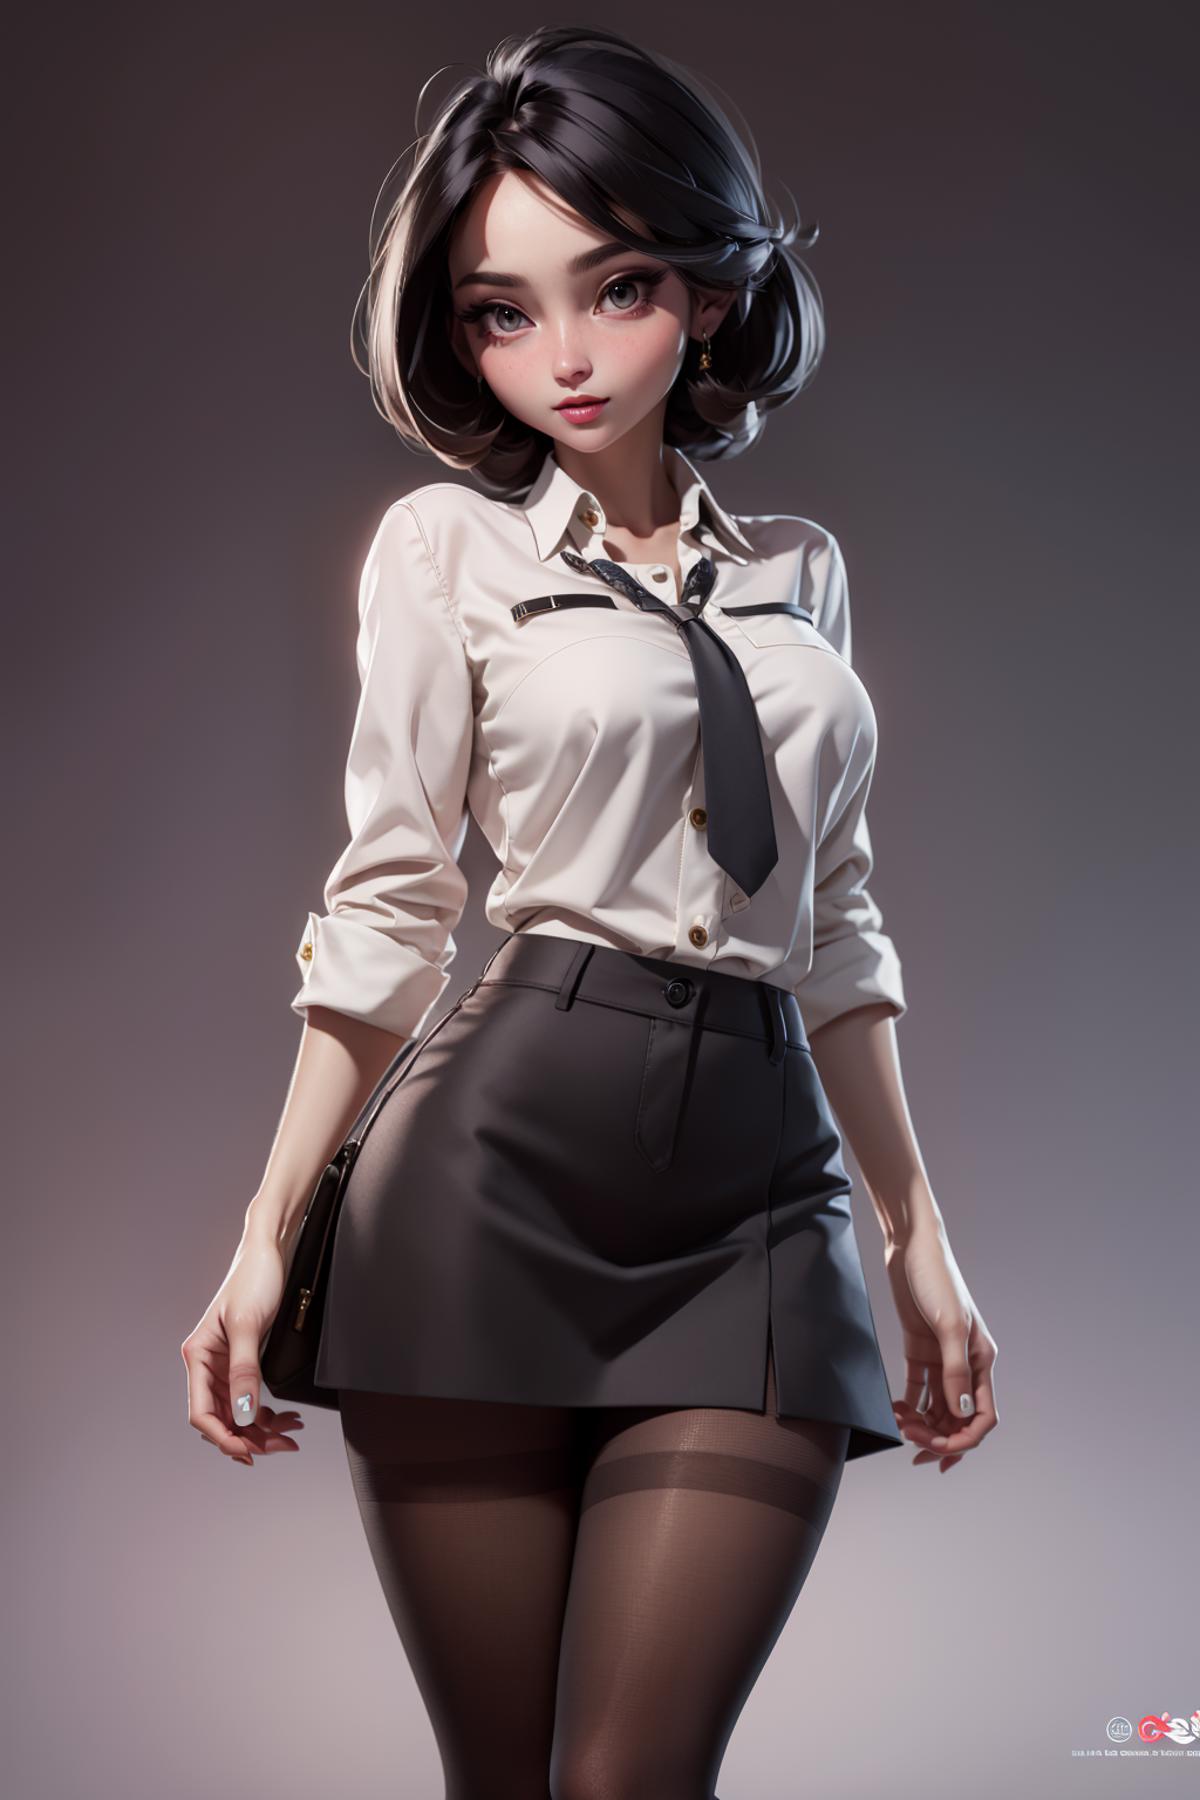 A computer-generated woman wearing a white shirt, black tie, and black skirt.